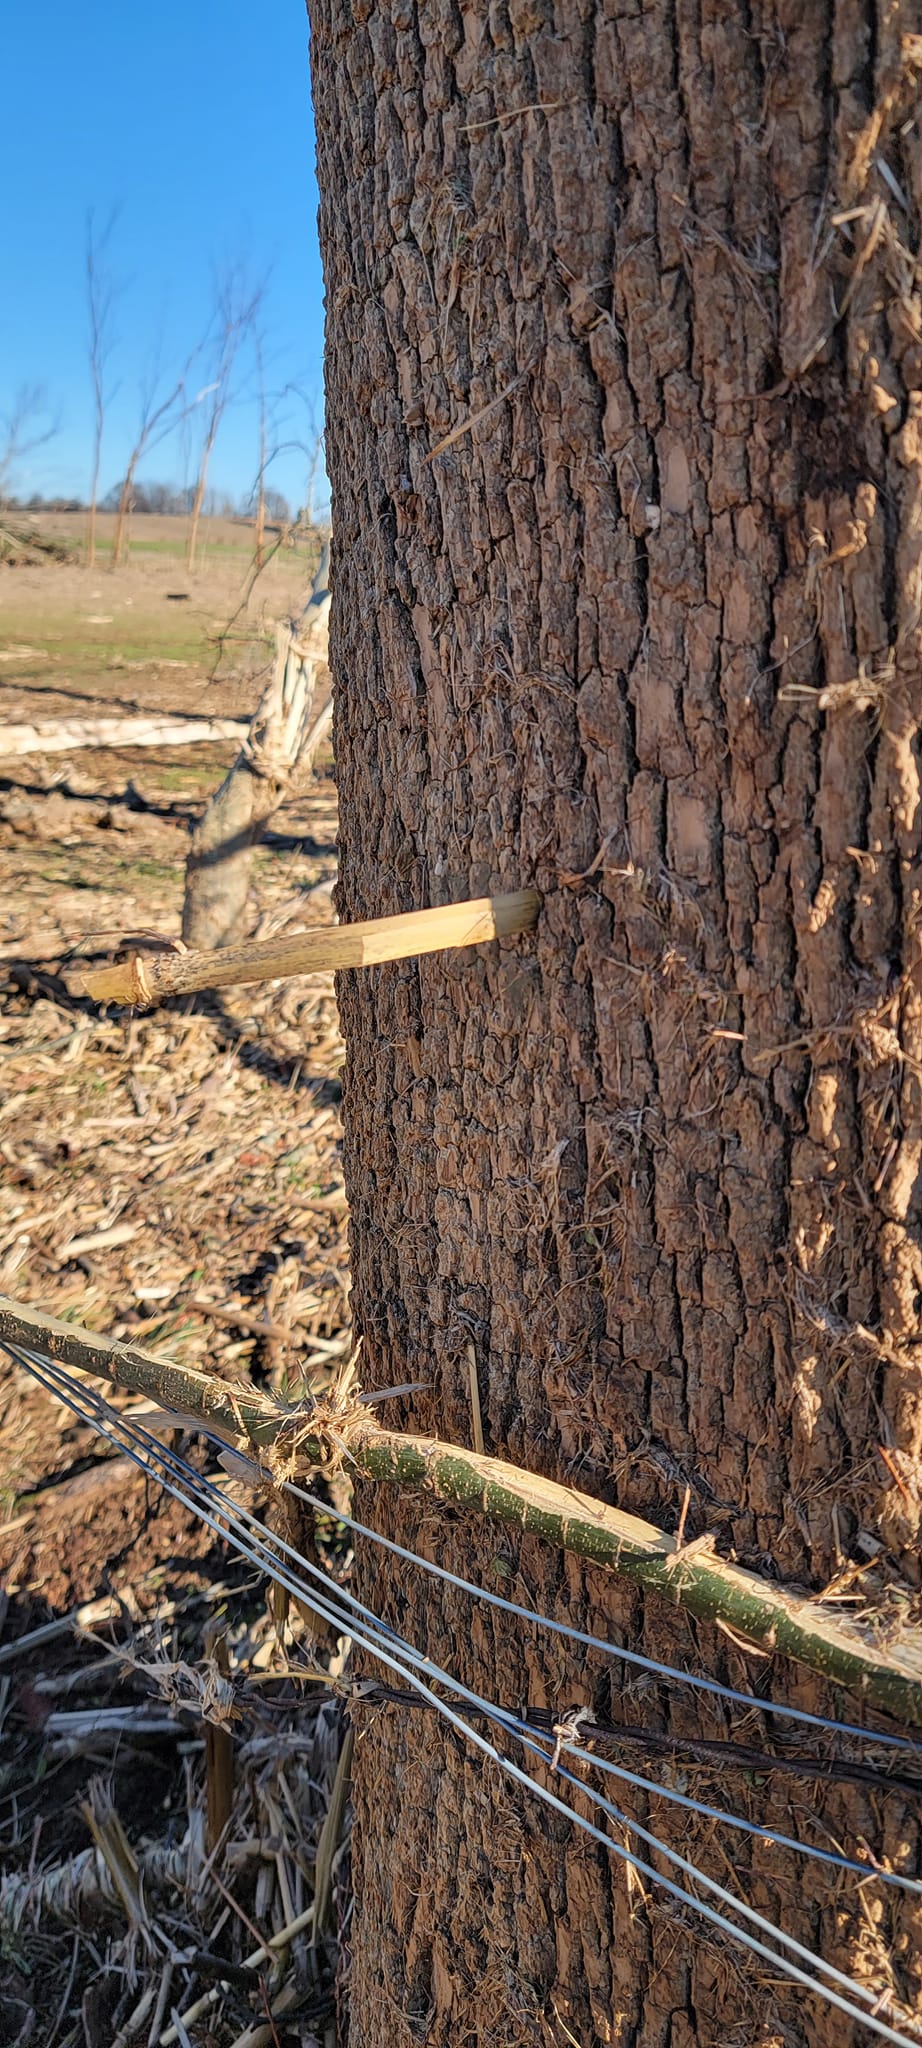 A corn stalk lodged in a tree on a farm near Cayce in Fulton County. Photo by Ben Rudy, Fulton County agriculture and natural resources agent.